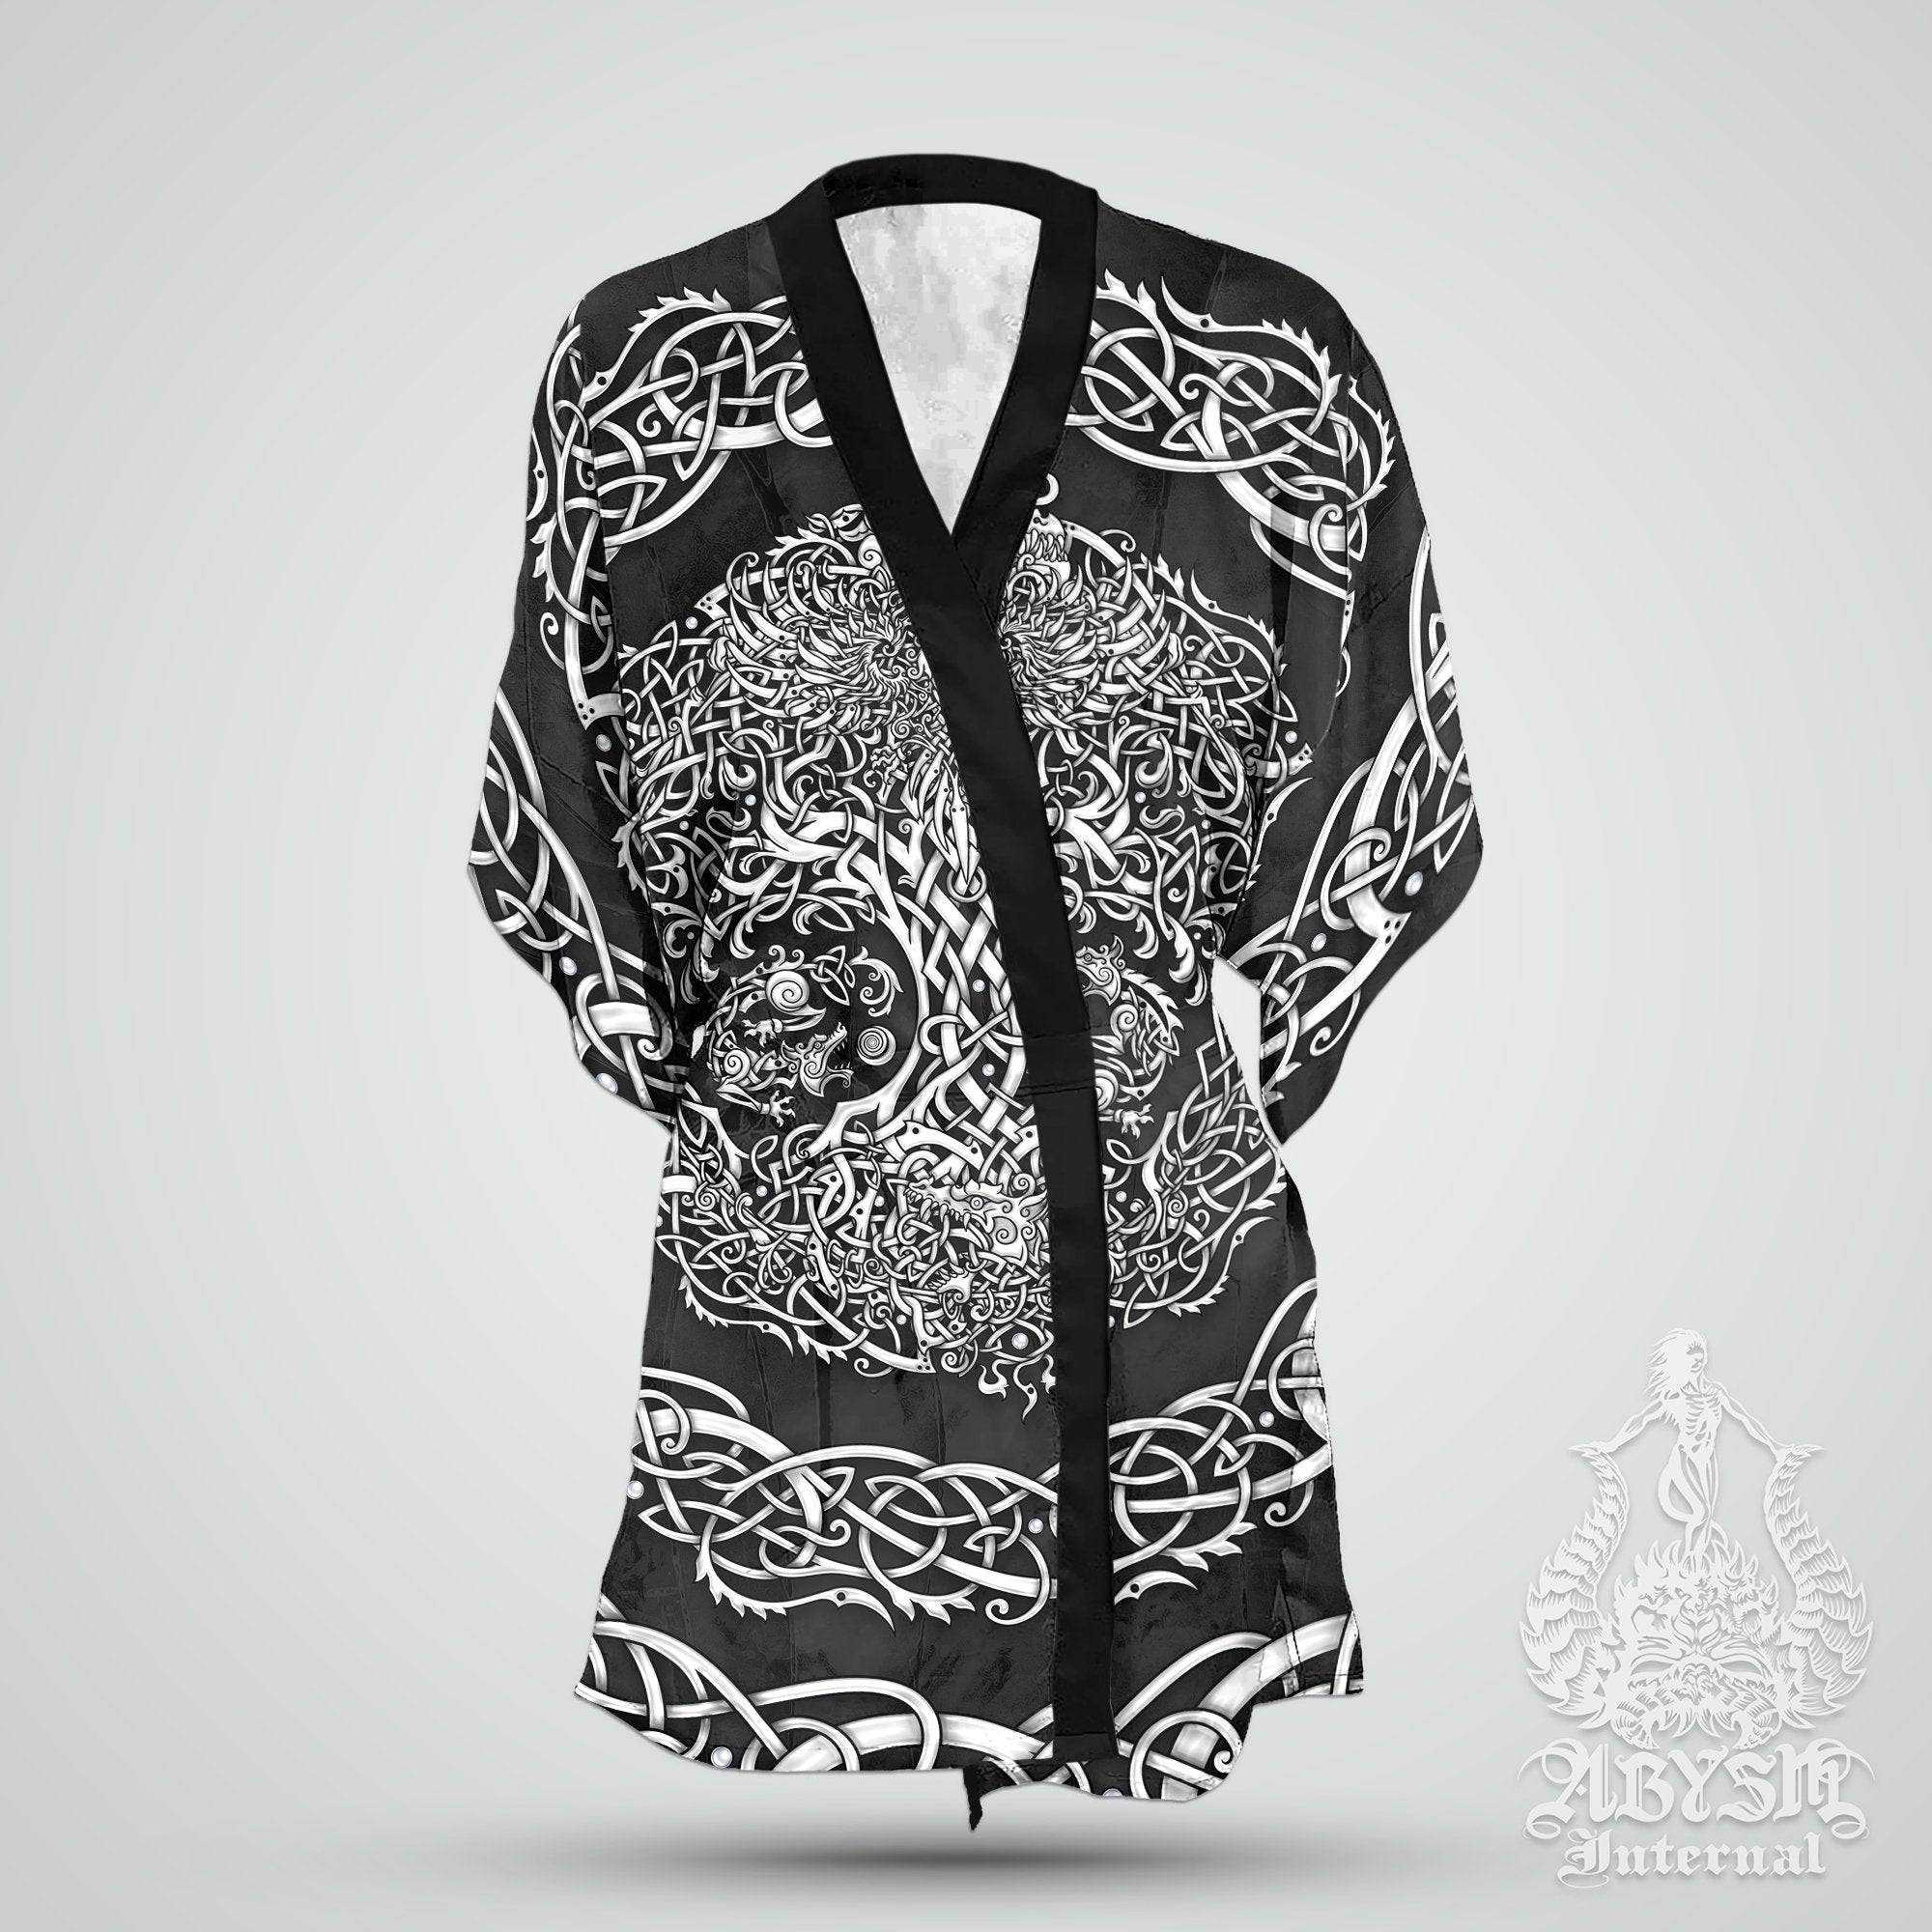 Viking Short Kimono Robe, Beach Party Outfit, Yggdrasil Coverup, Summer Festival, Norse Alternative Clothing, Unisex - Tree of Life, White and Colors: Black, Red, Blue - Abysm Internal